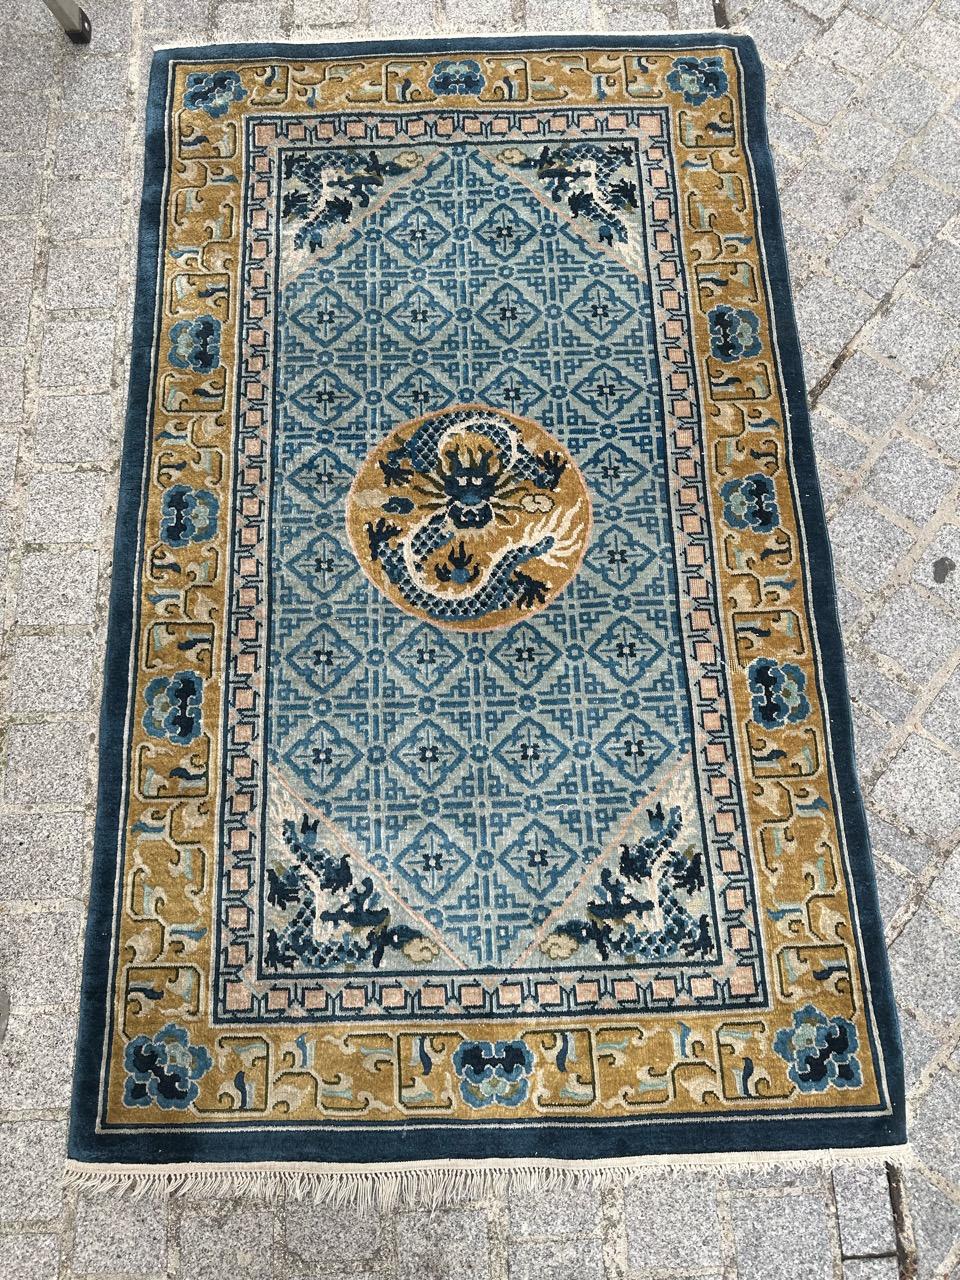 Exquisite 1980s Chinese Silk Rug – A true masterpiece of hand-knotted craftsmanship. This silk-on-silk rug features an intricate design inspired by ancient Chinese patterns. In its center, a stunning yellow background adorned with a light and dark